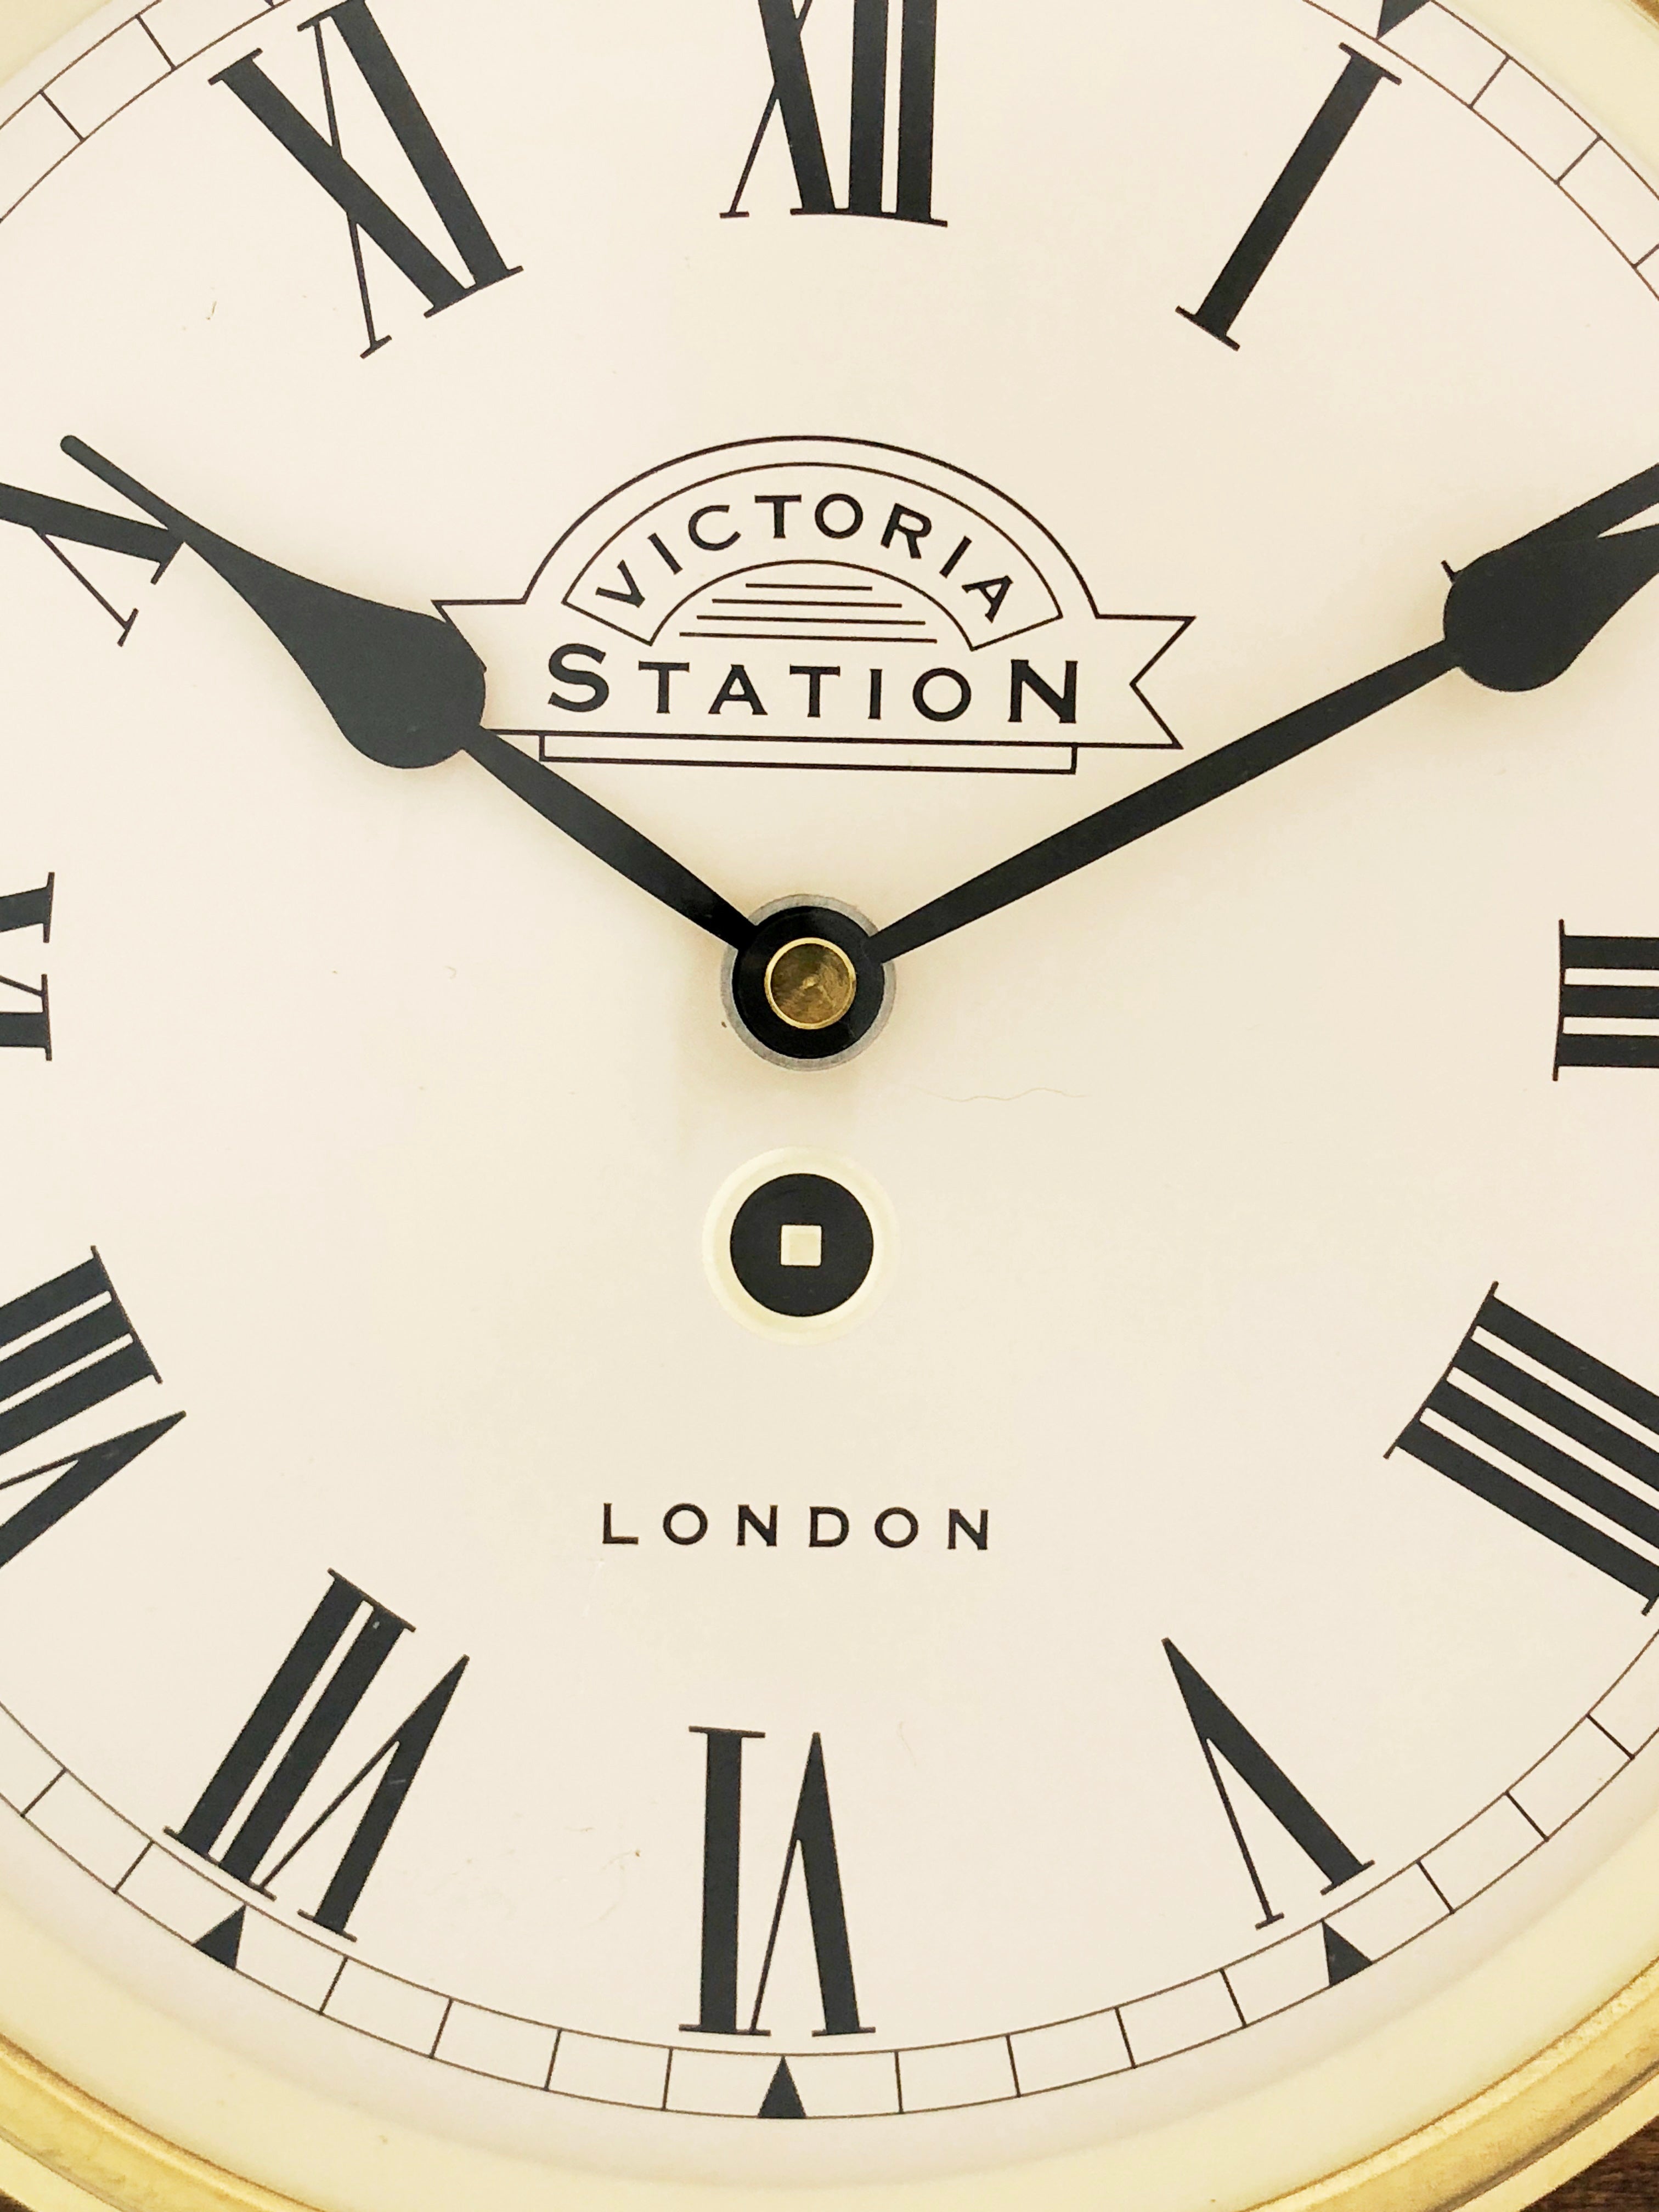 Vintage Style Victoria Station LONDON Battery Wall Clock | eXibit collection